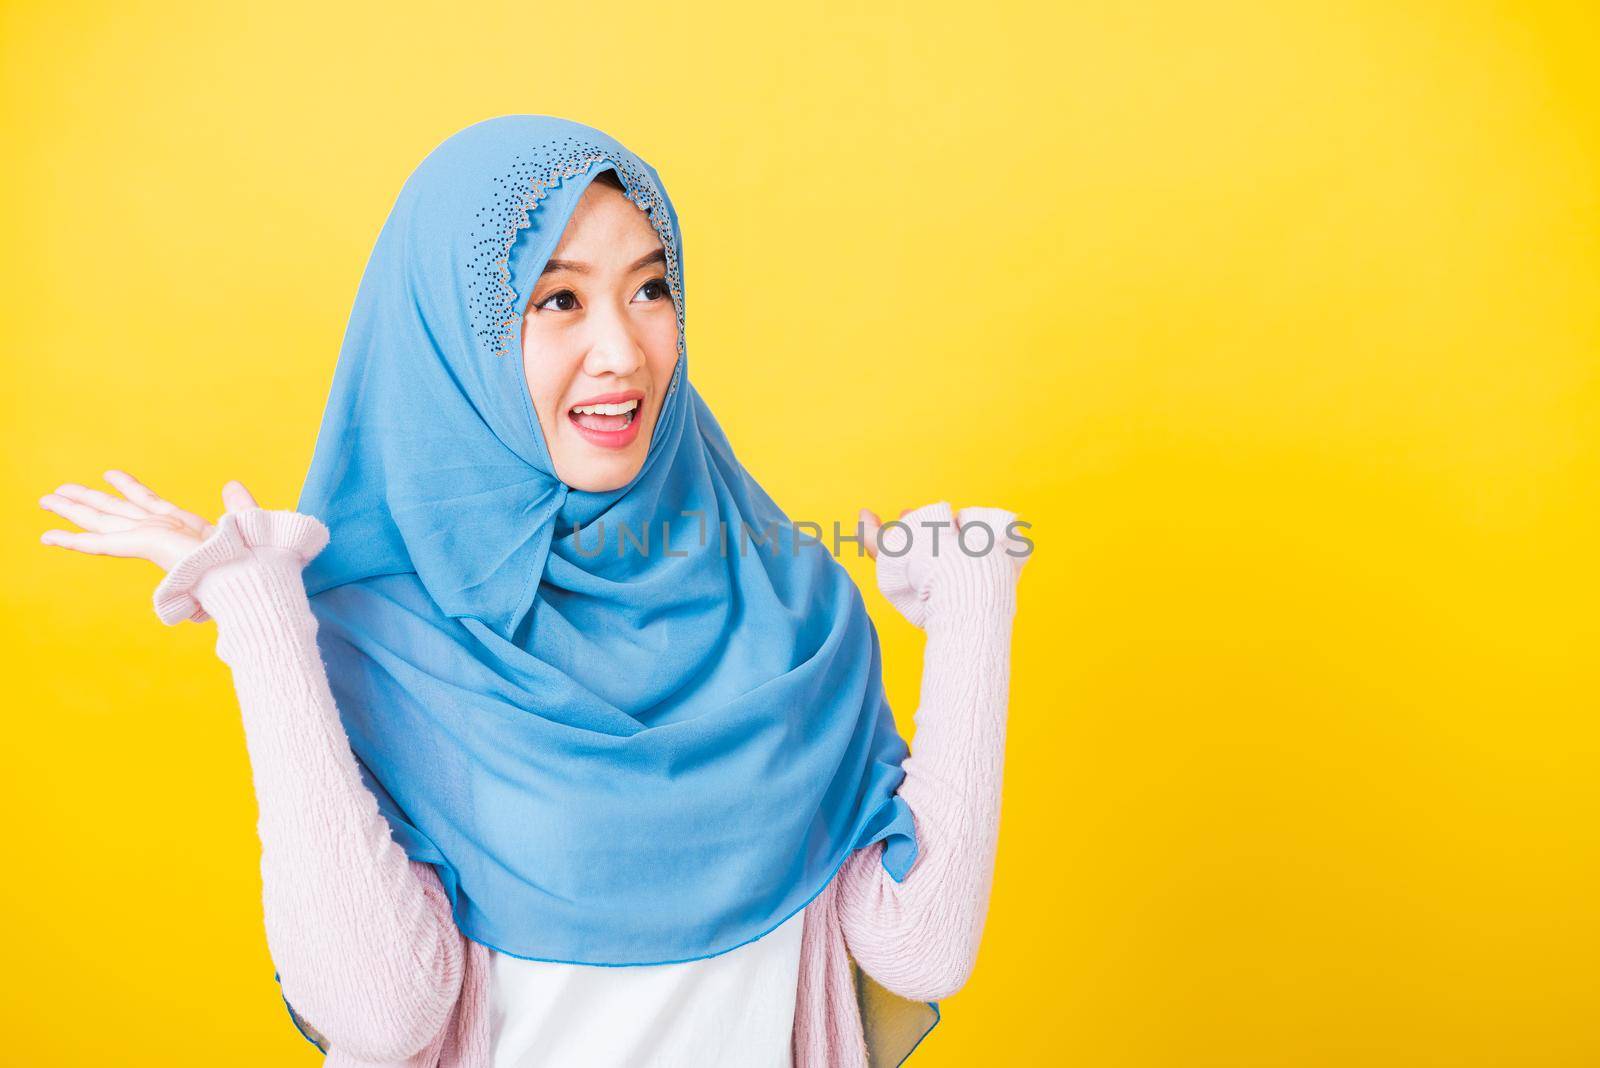 Asian Muslim Arab woman Islam wear veil she victories expression raises hands glad excited cheerful by Sorapop